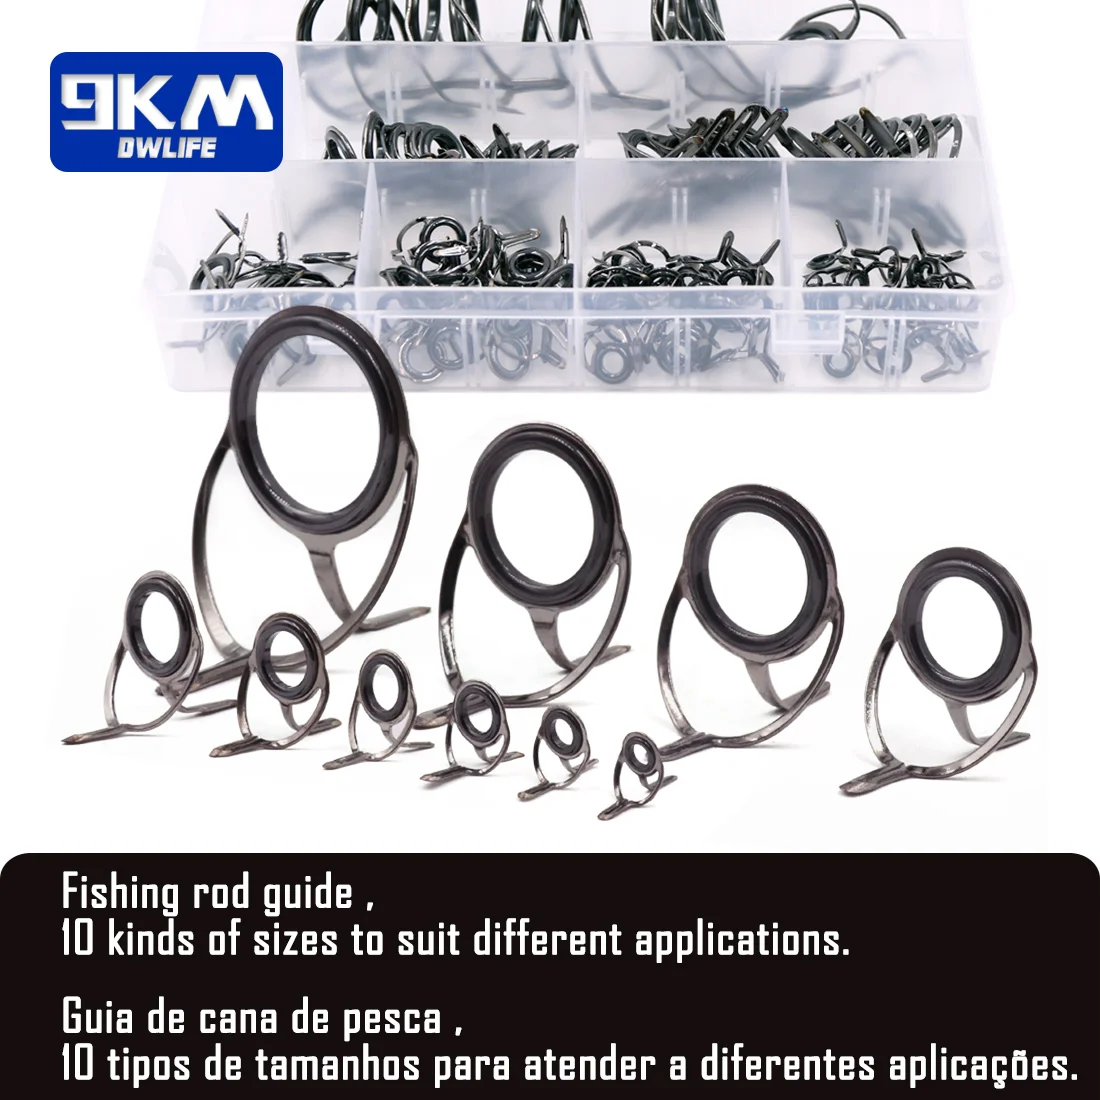 https://ae01.alicdn.com/kf/S557602fb0fdc4b958b0756c46e8b45bez/Fishing-Rod-Guide-9-200Pcs-Stainless-Steel-Ceramics-Rings-Rod-Repair-Kit-Spinning-Casting-Mixed-Size.jpg